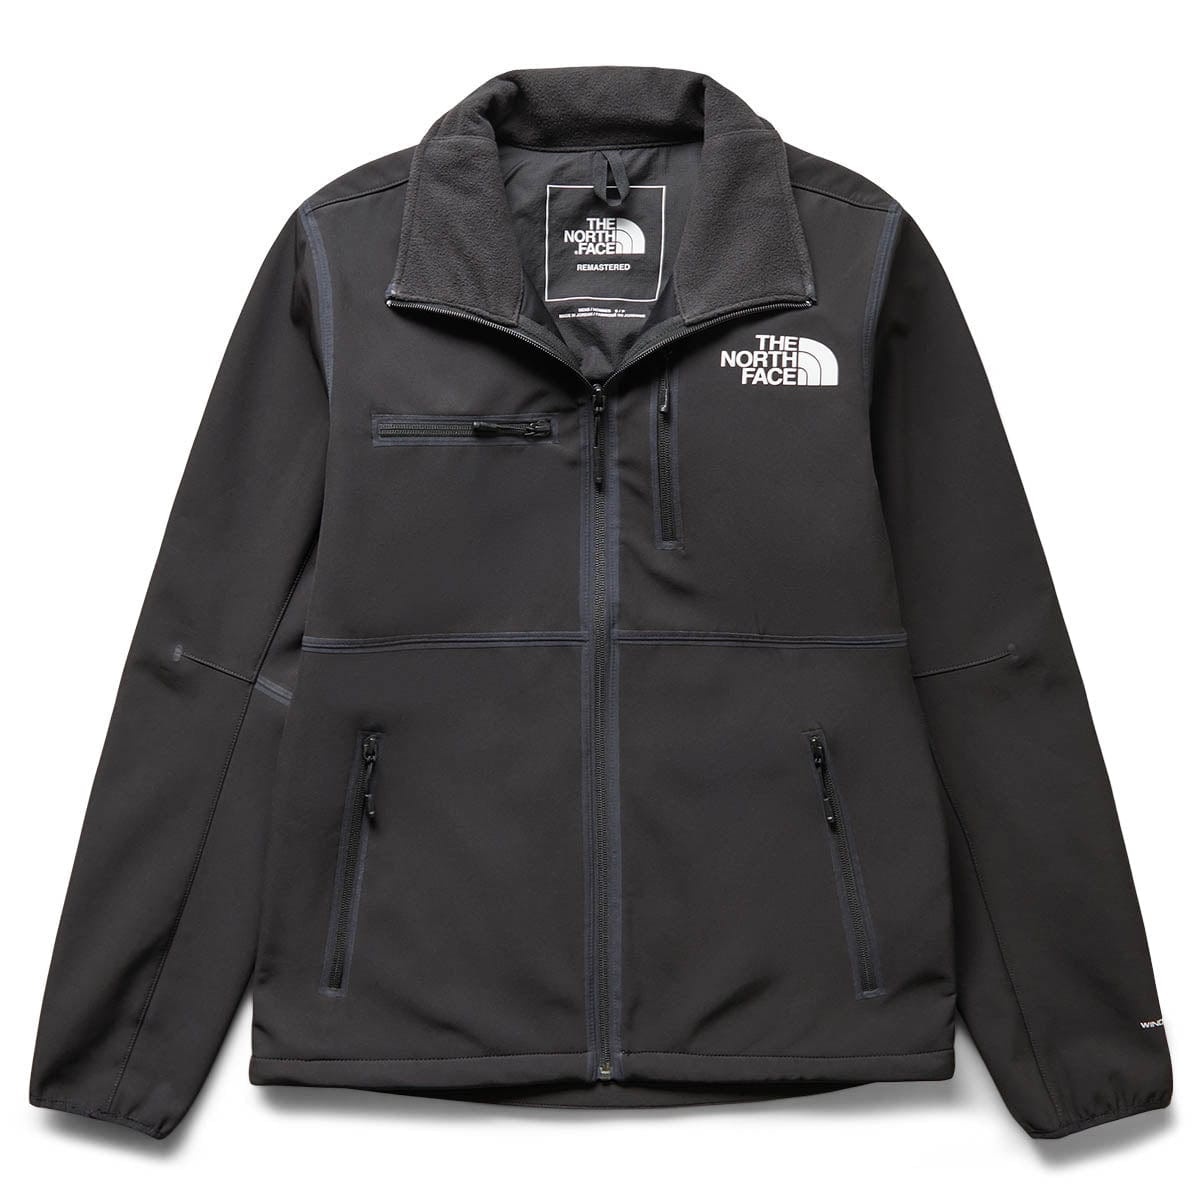 The North Face Outerwear RMST DENALI JACKET